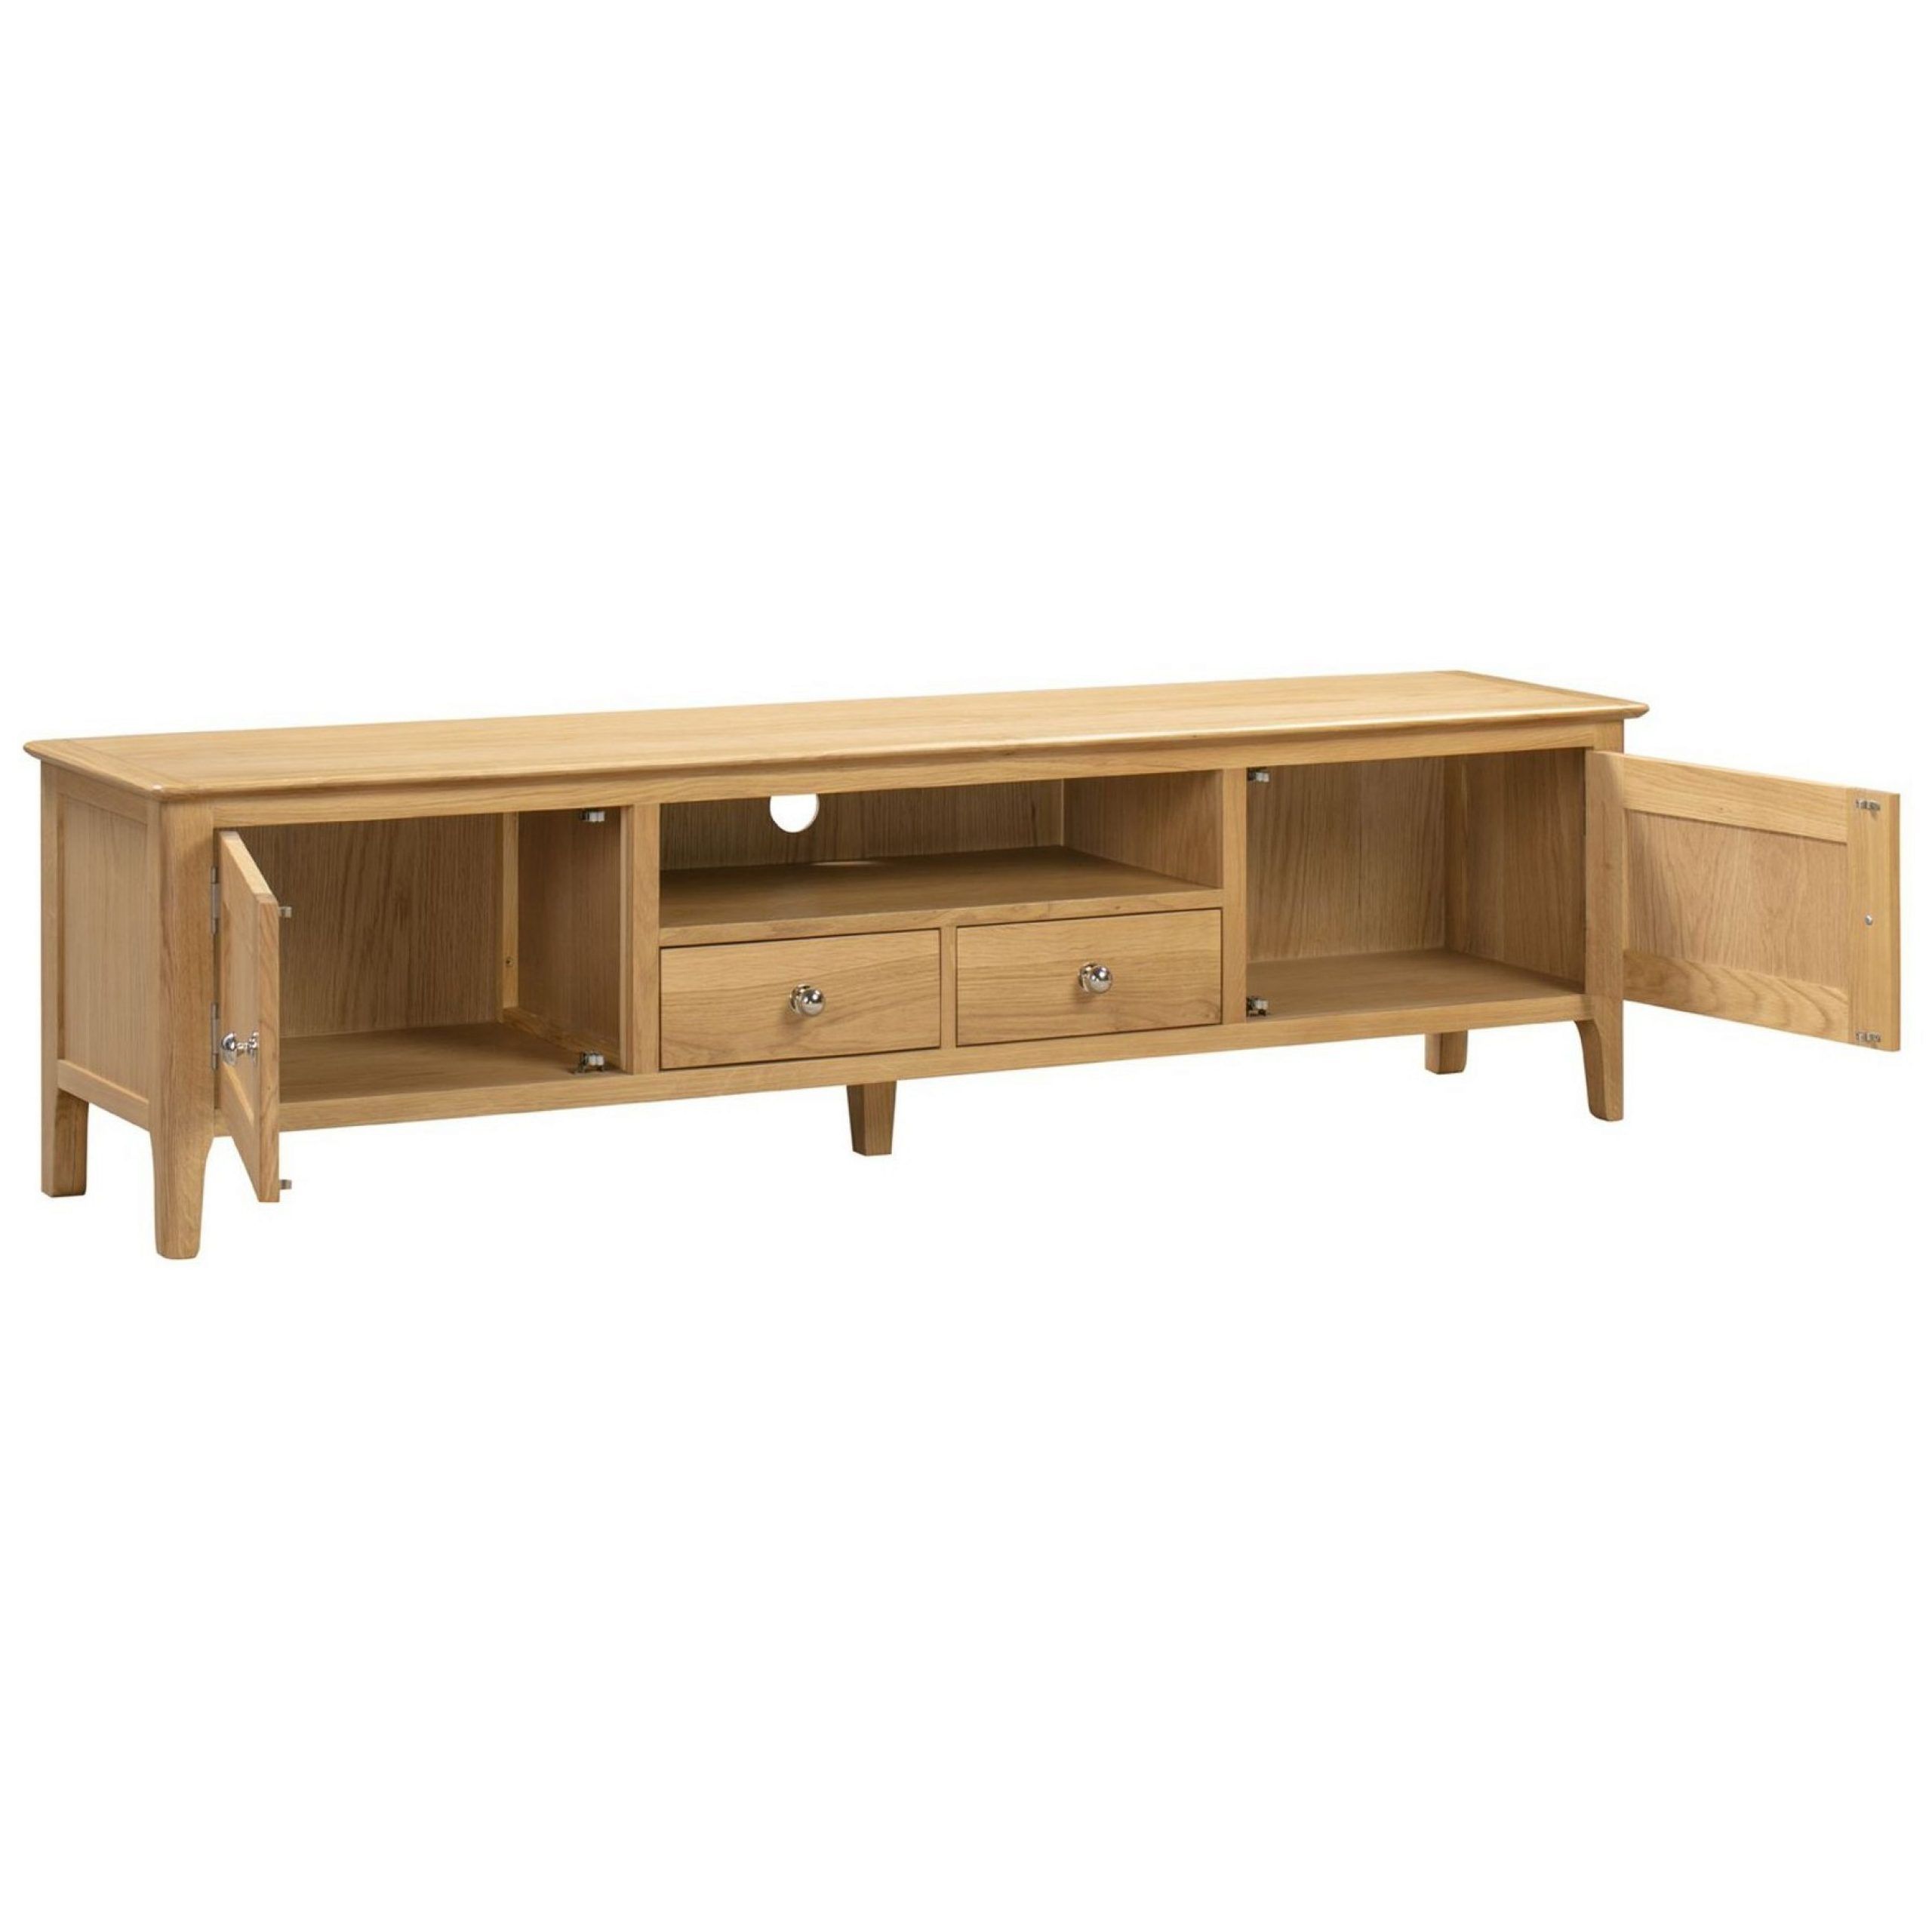 Buy Cotswold Tv Unitjulian Bowen From The Next Uk Throughout Cotswold Widescreen Tv Unit Stands (View 14 of 15)